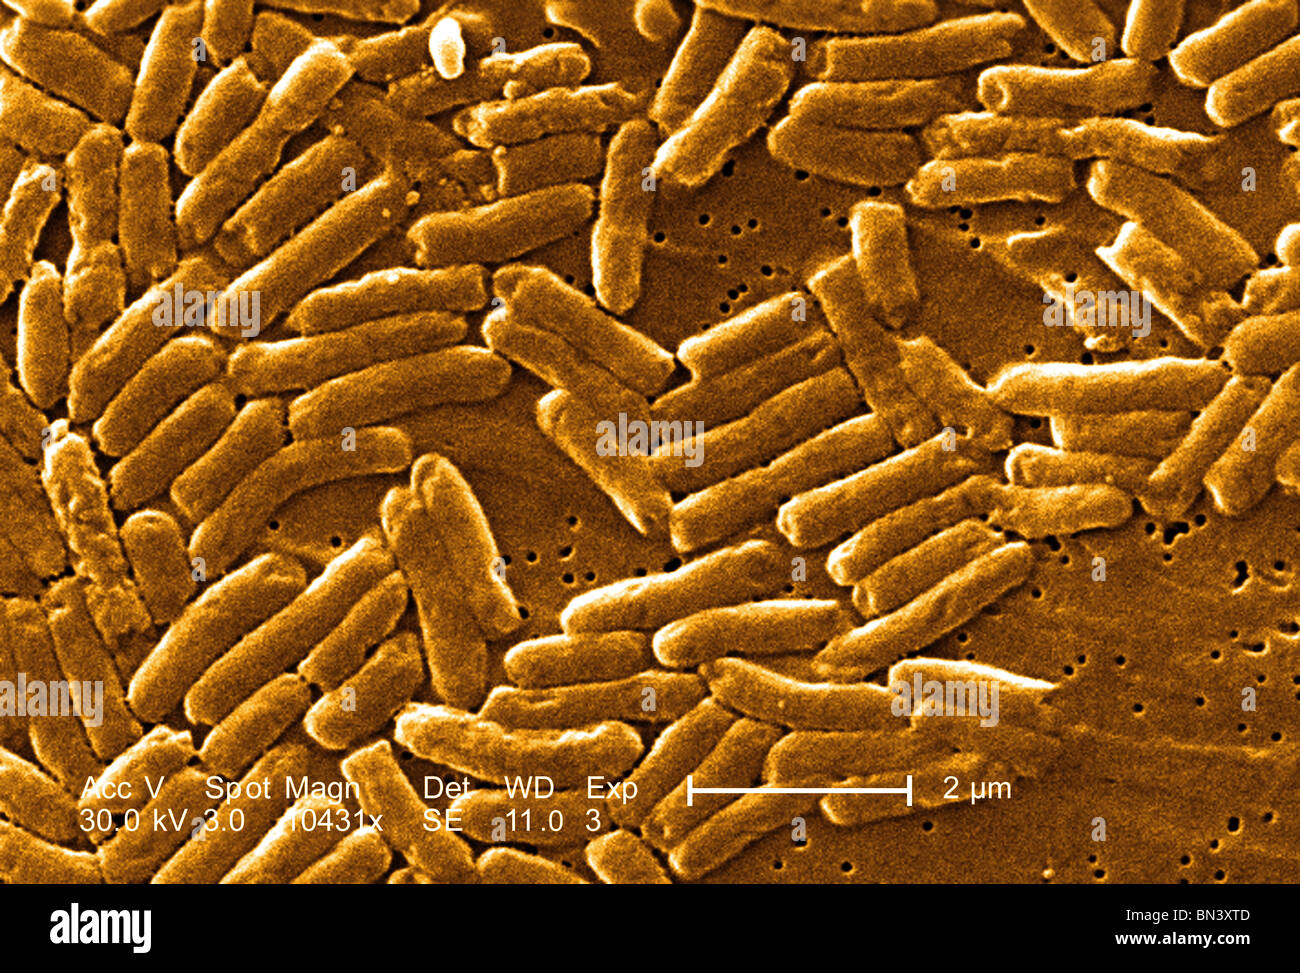 High magnification of 10431X,  scanning electron micrograph (SEM) of a colony of Gram-negative bacilli Stock Photo